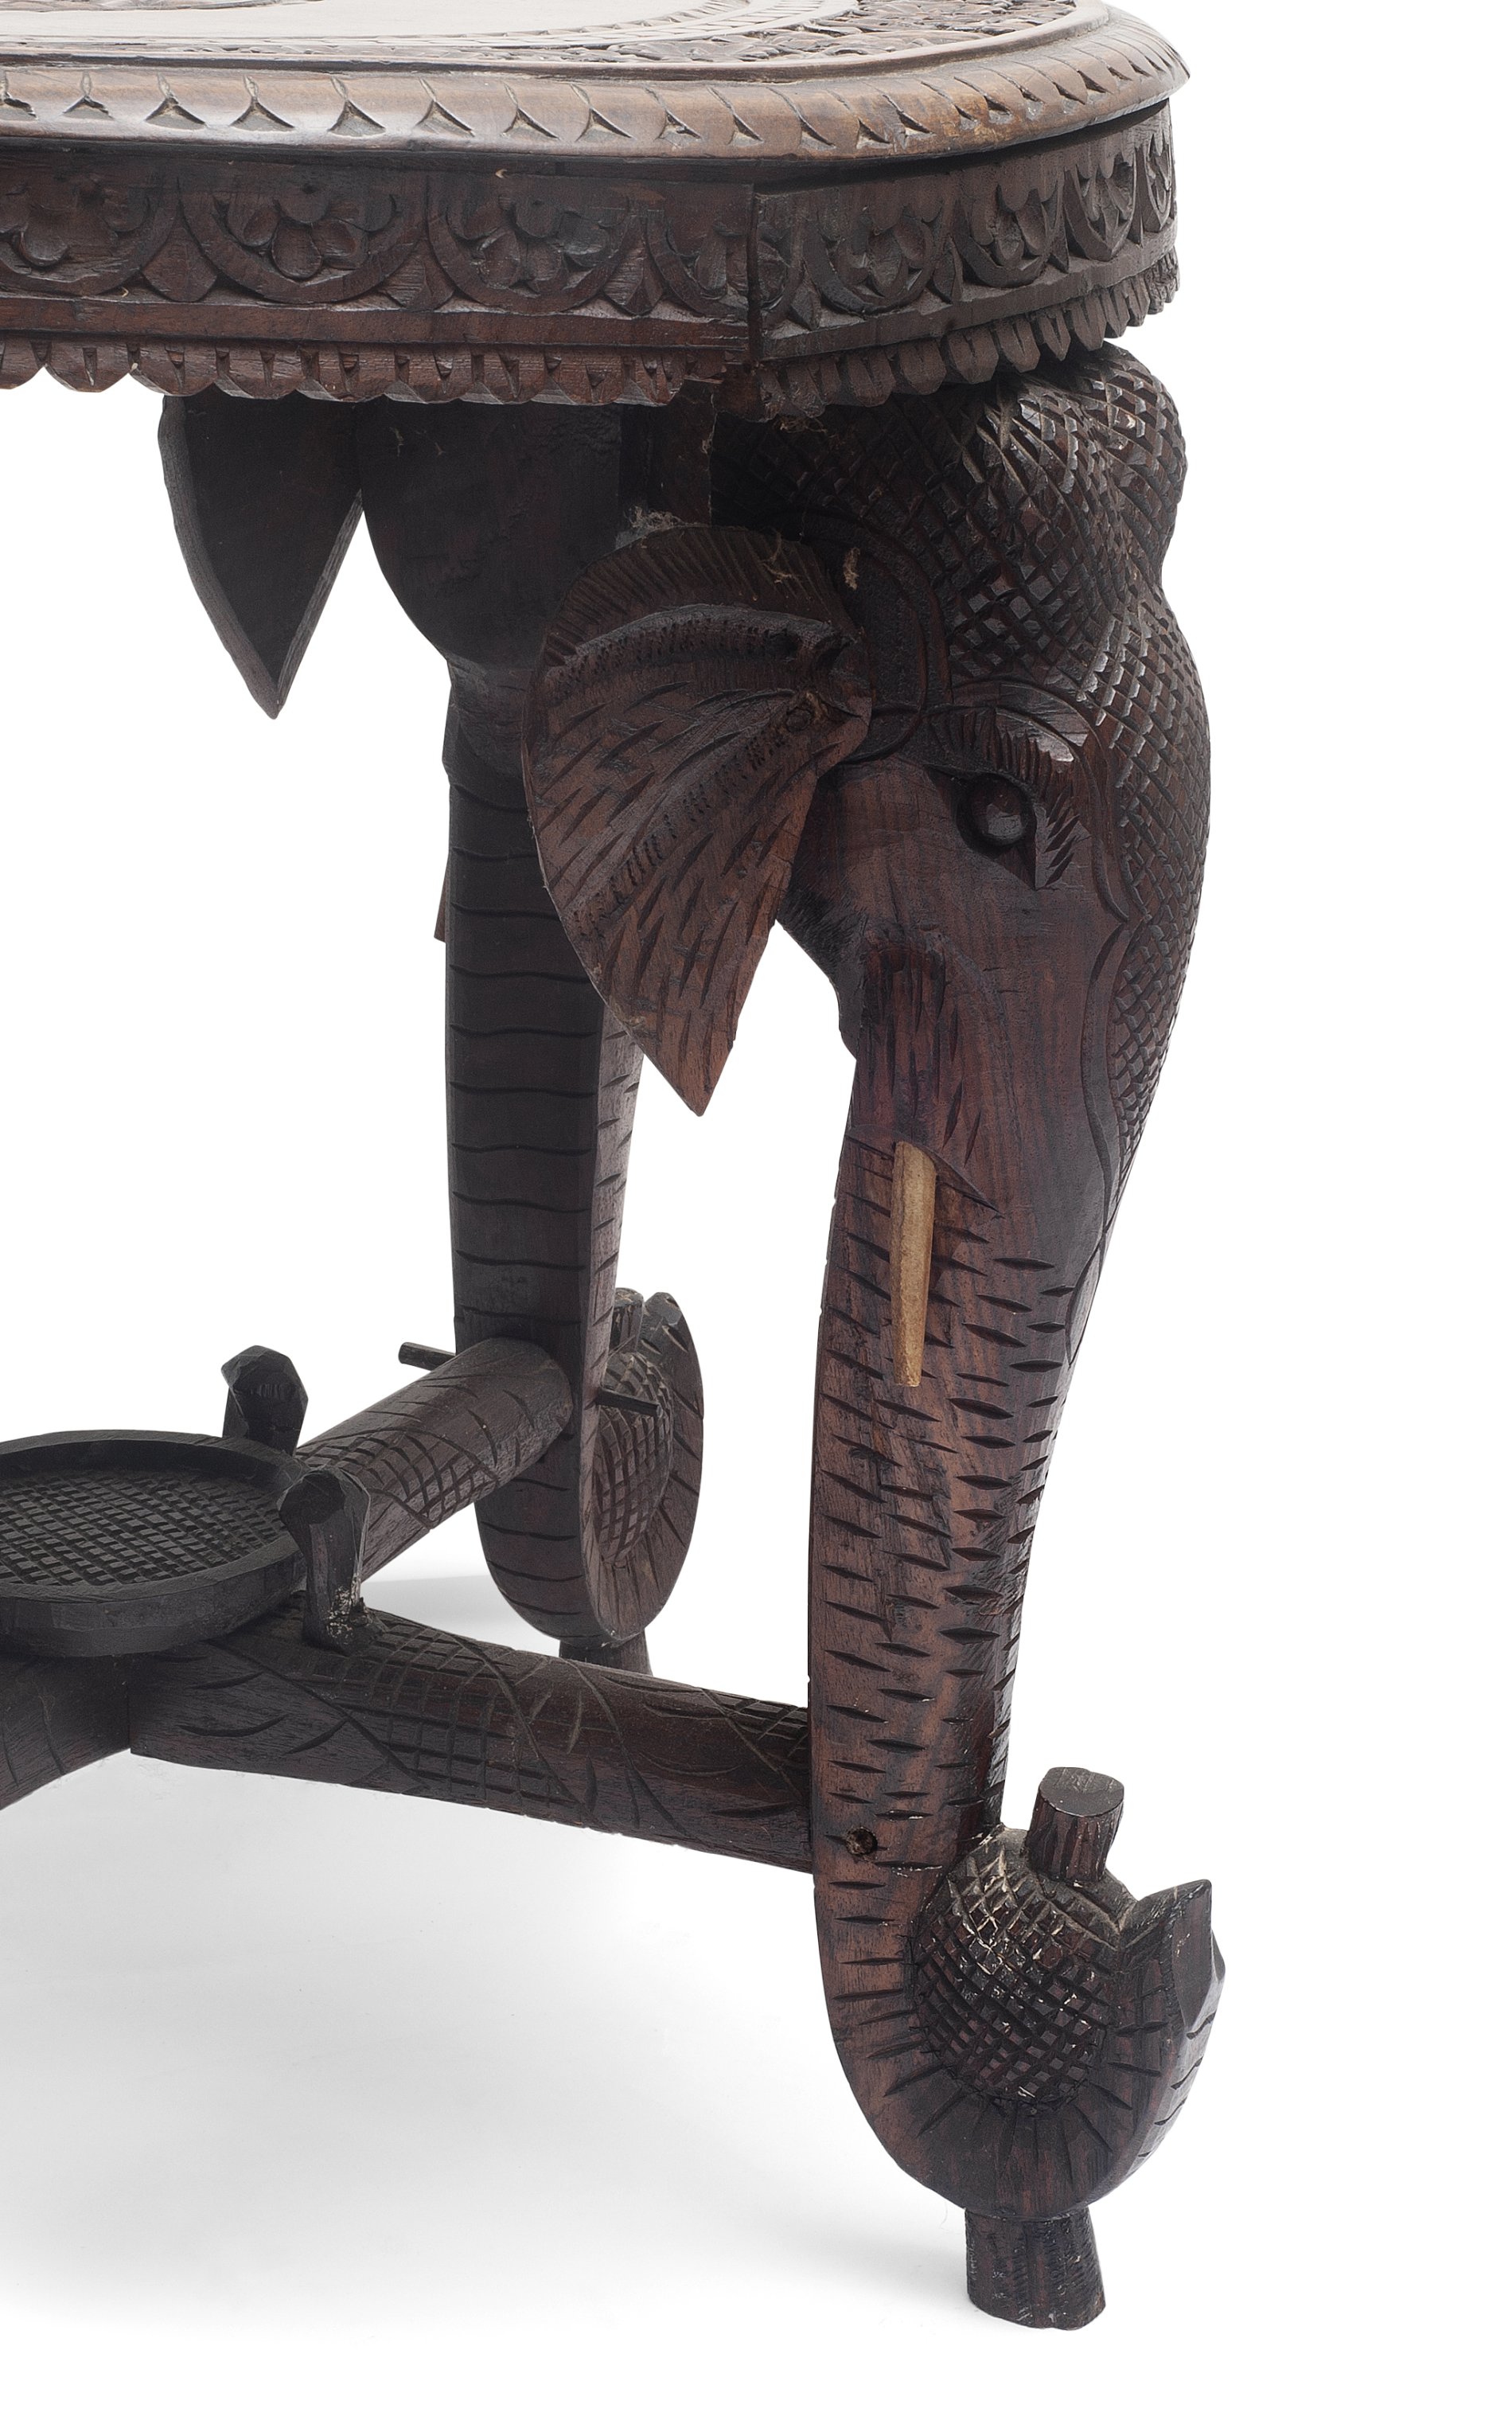 AN EARLY 20TH CENTURY INDIAN CARVED WOOD TABLE OF ELEPHANT THEME - Image 2 of 4